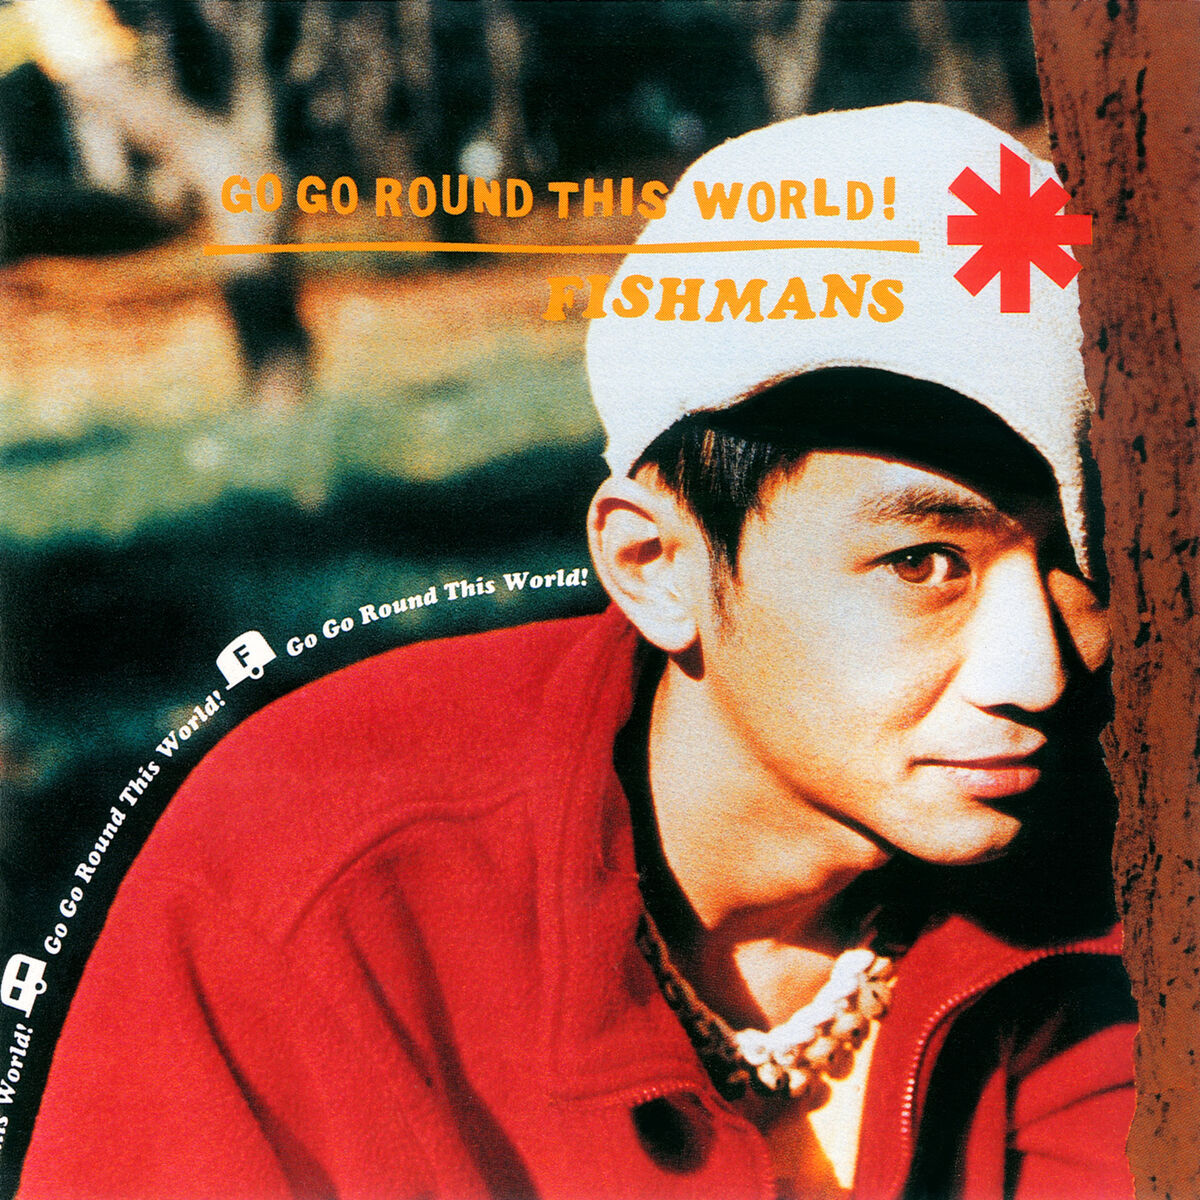 CDJapan : Go Go Round This World! - Fishmans 25th Anniversary Record Box  [Limited Release] Fishmans Vinyl (LP)